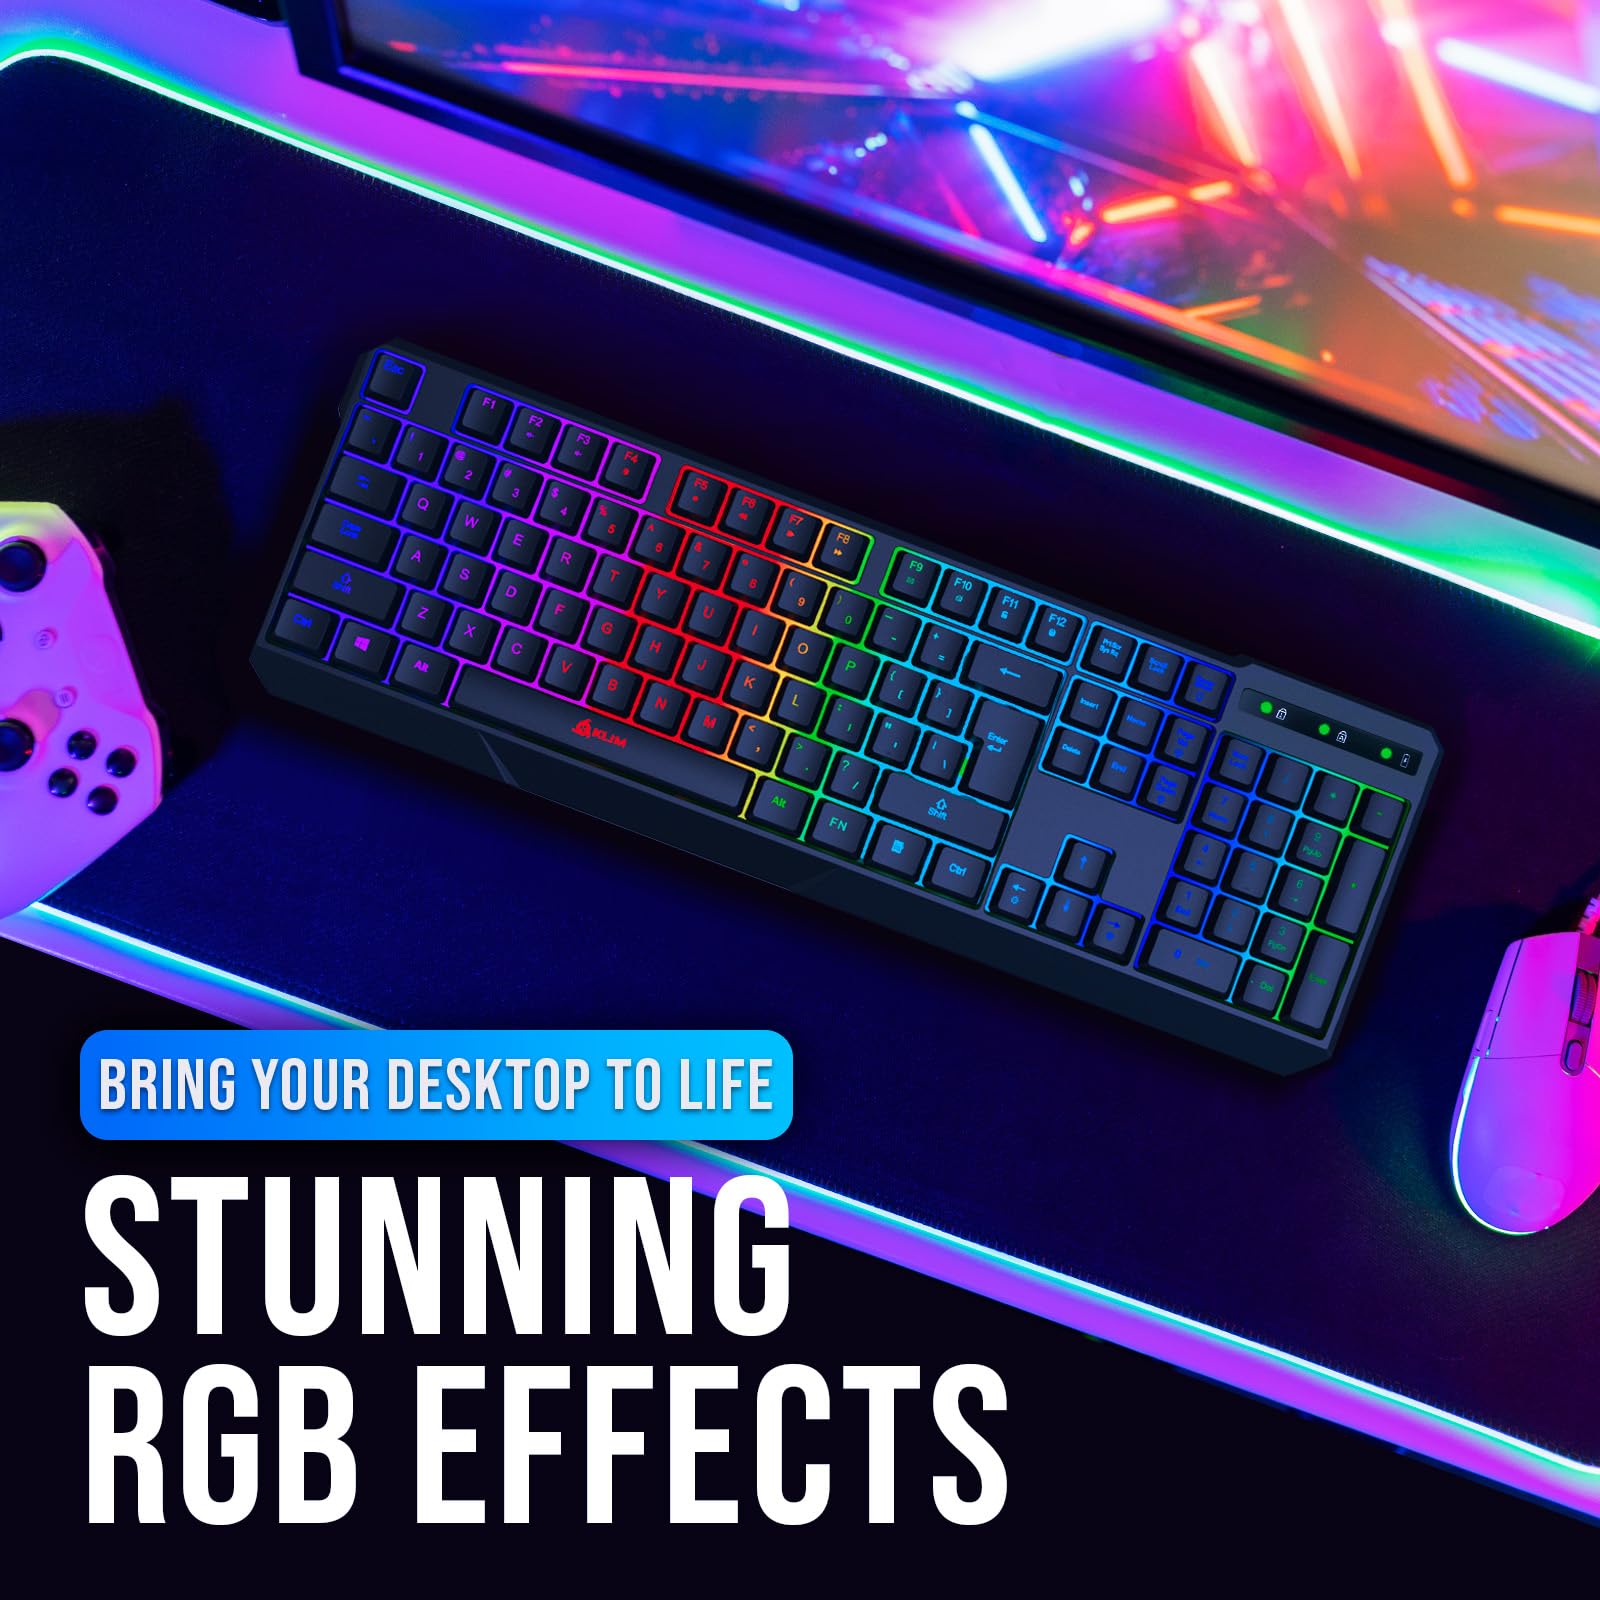 KLIM Chroma Wireless Gaming Keyboard RGB - New 2023 - Long-Lasting Rechargeable Battery - Quick & Quiet Typing - Water Resistant Backlit Wireless Keyboard - Teclado Gamer - PC PS5 PS4 Xbox One Mac